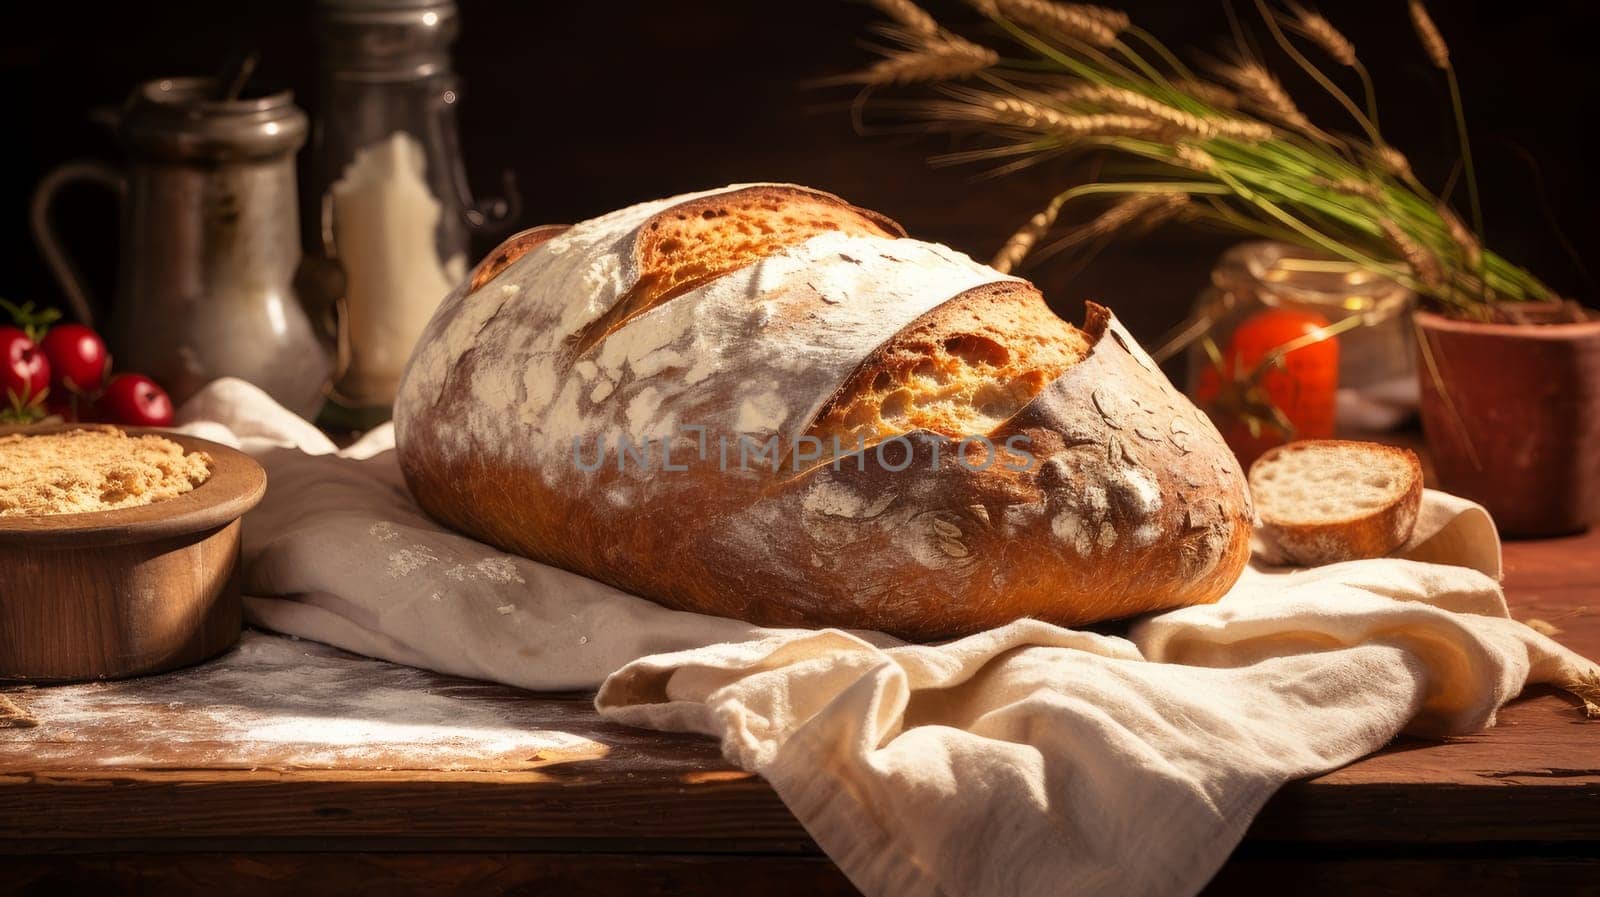 Fresh fragrant, hot bread on the table with herbs, on a wooden table, all inclusive, shop. Fresh classic pastries. Delicious food concept, private bakery, small business, self-employed, small business in the city, cozy place for communication